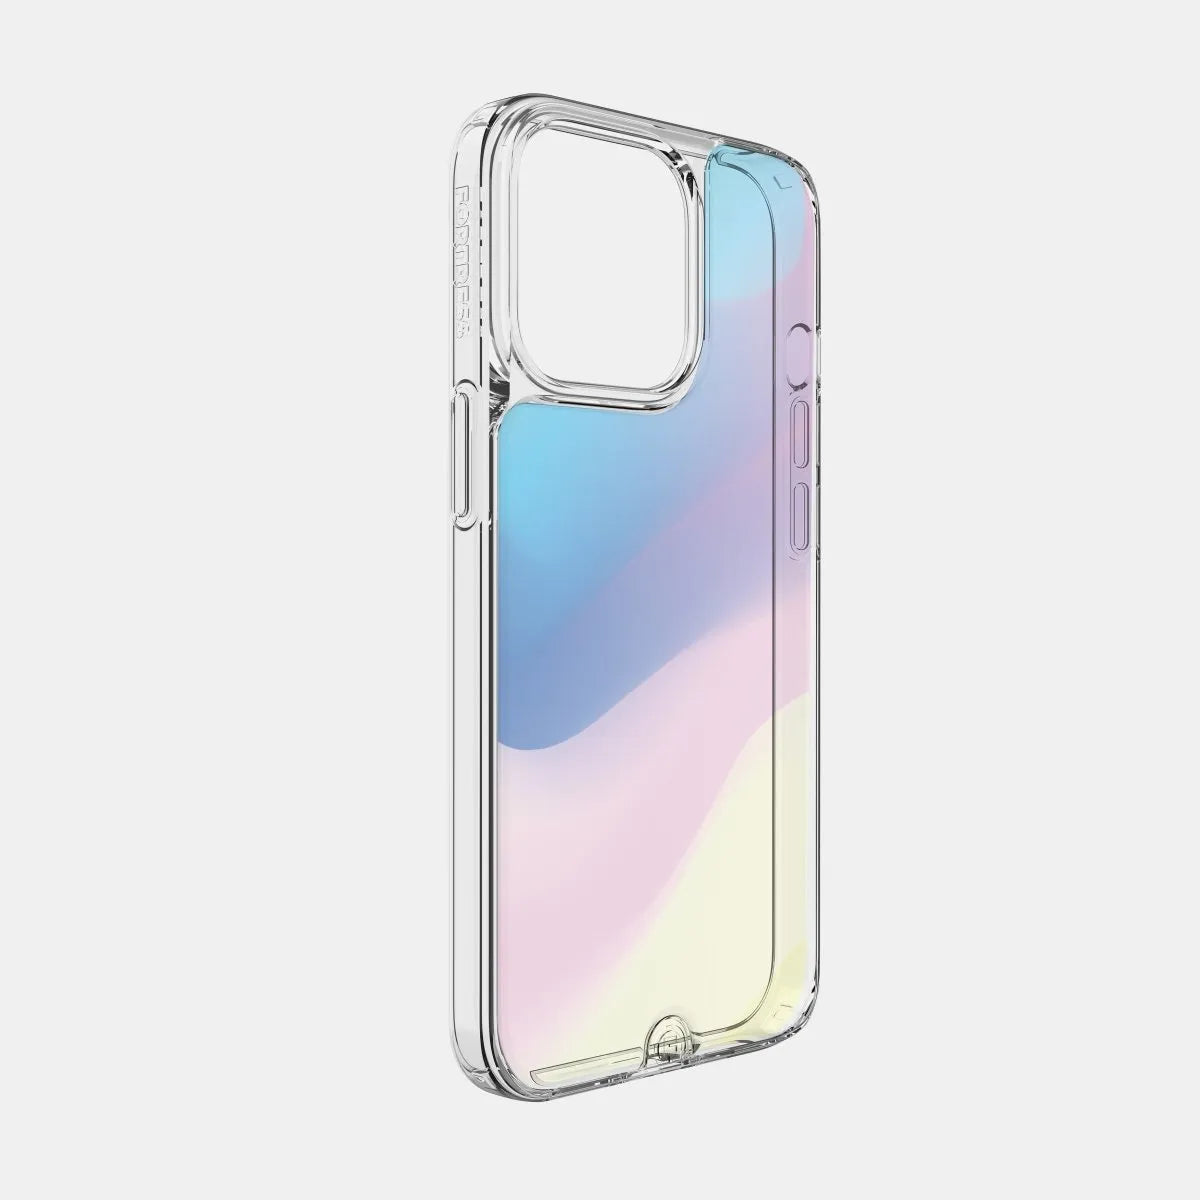 Fortress Fortress Swipe Style Inserts (Curiosity Collection) for iPhone 13 Pro Max Infinite Glass Case  Infinite Glass 